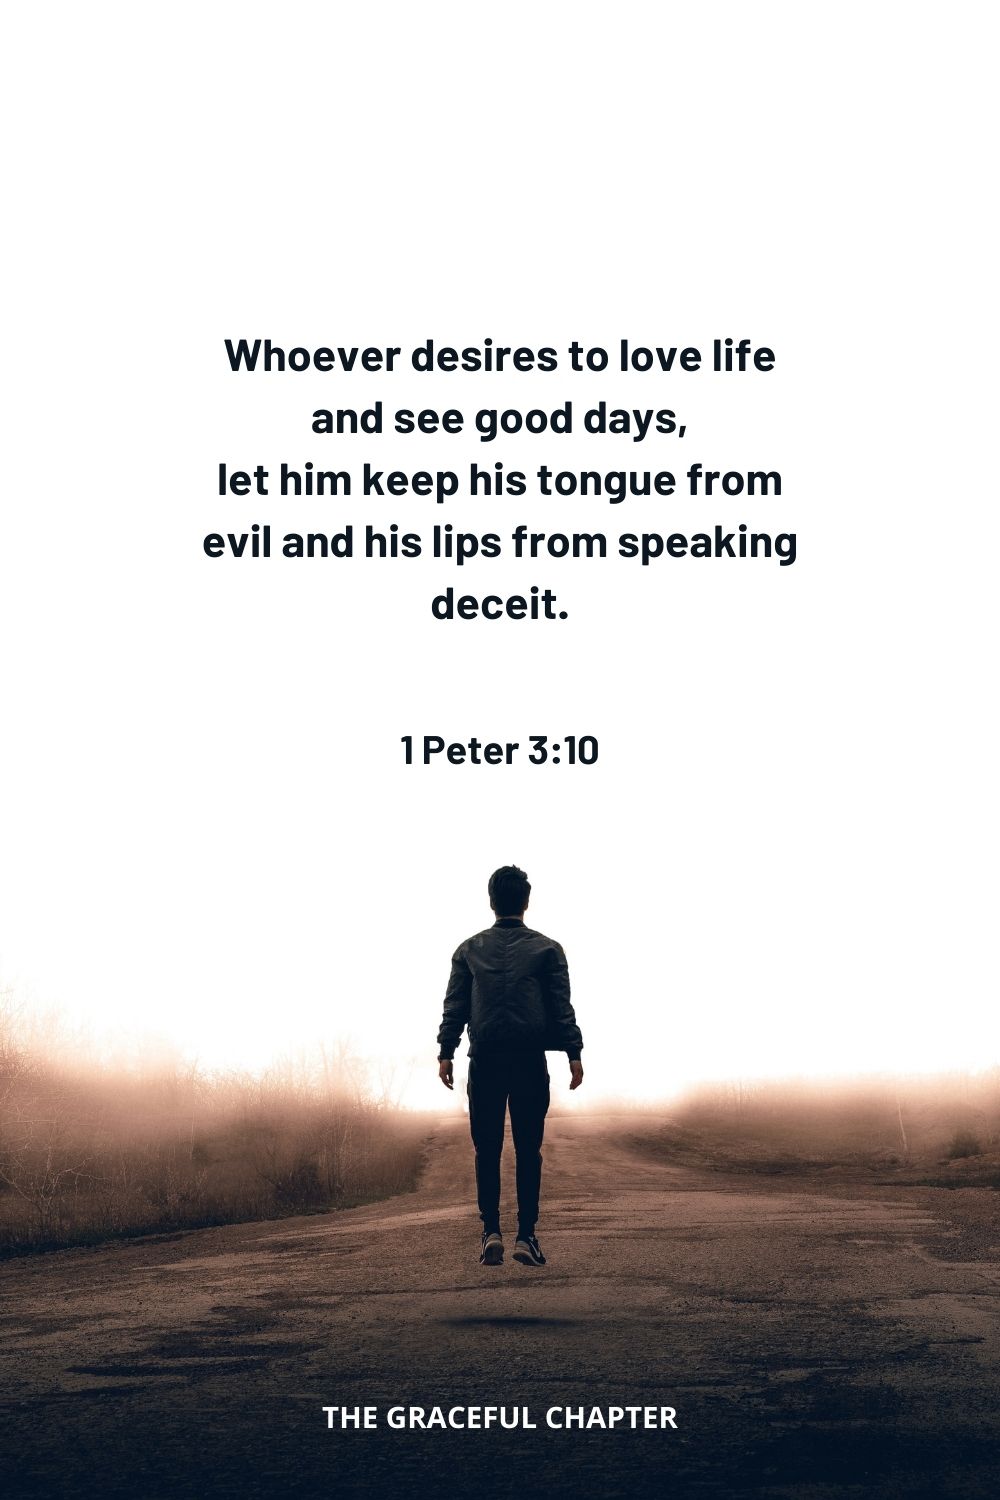 Whoever desires to love life and see good days, let him keep his tongue from evil and his lips from speaking deceit. 1 Peter 3:10